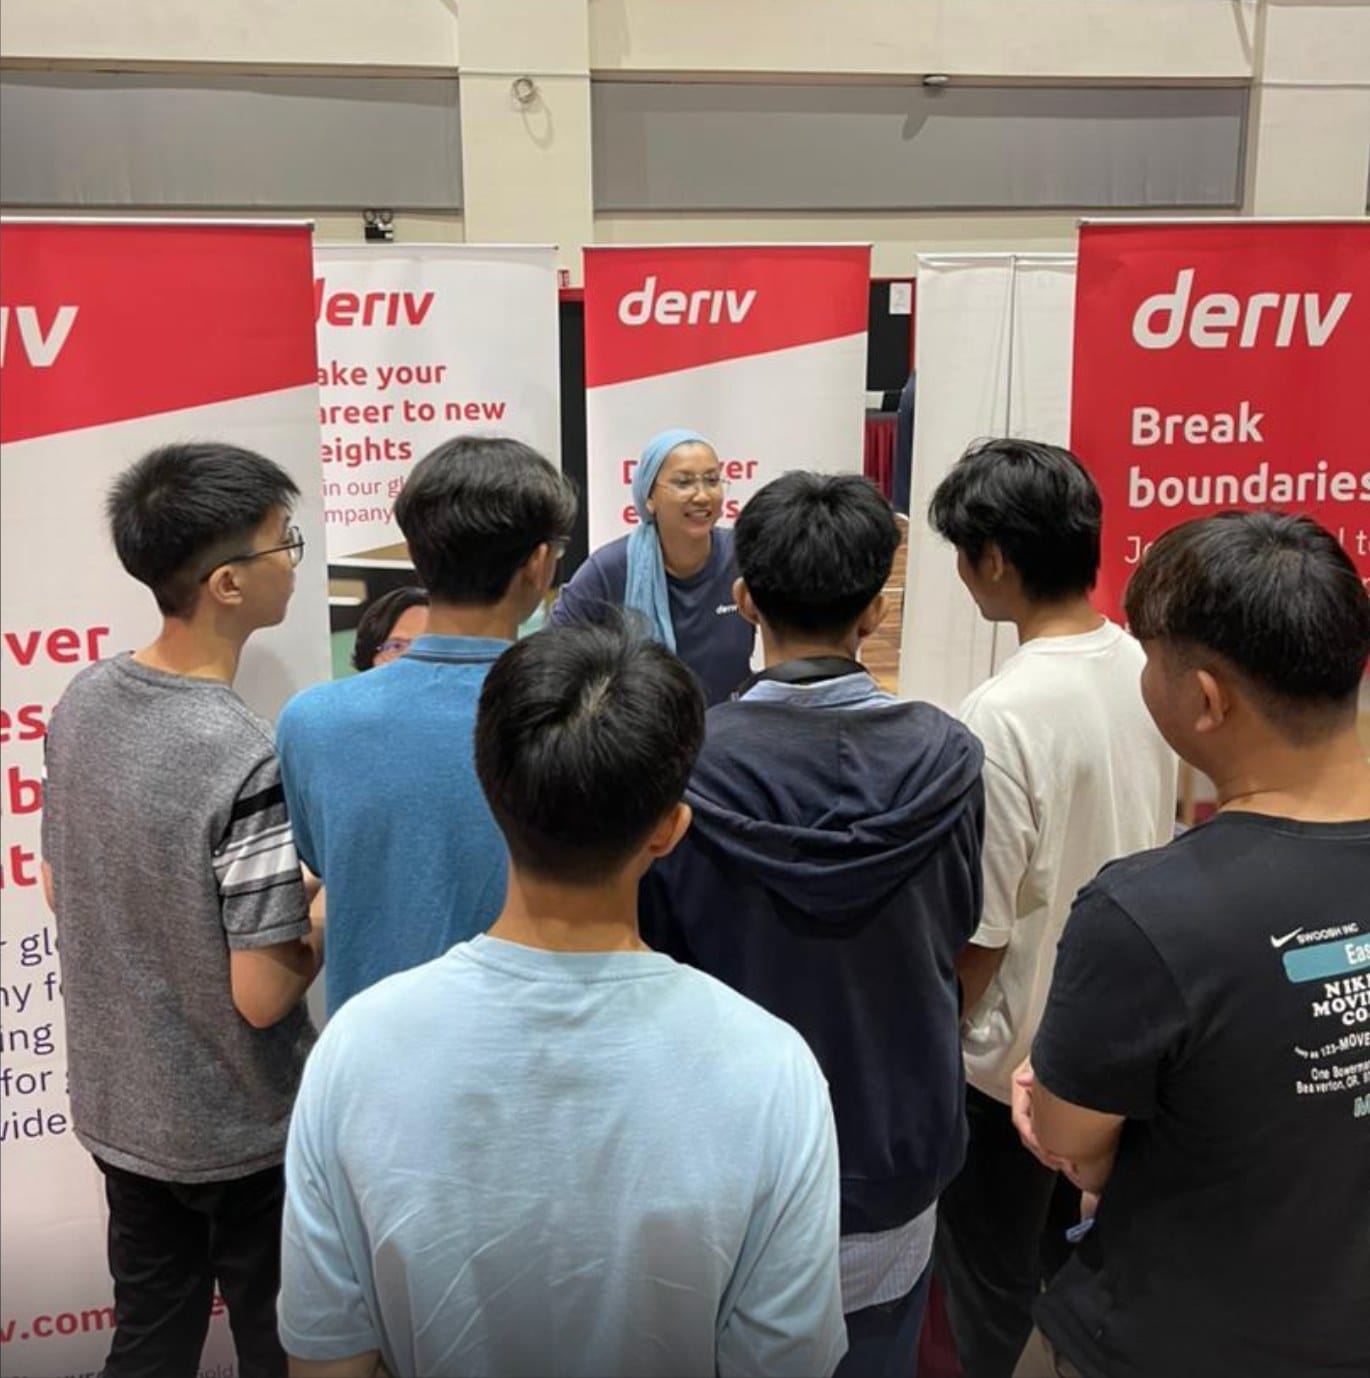 Deriv HR representative meeting with students at the Taylor’s NexTech Conference.